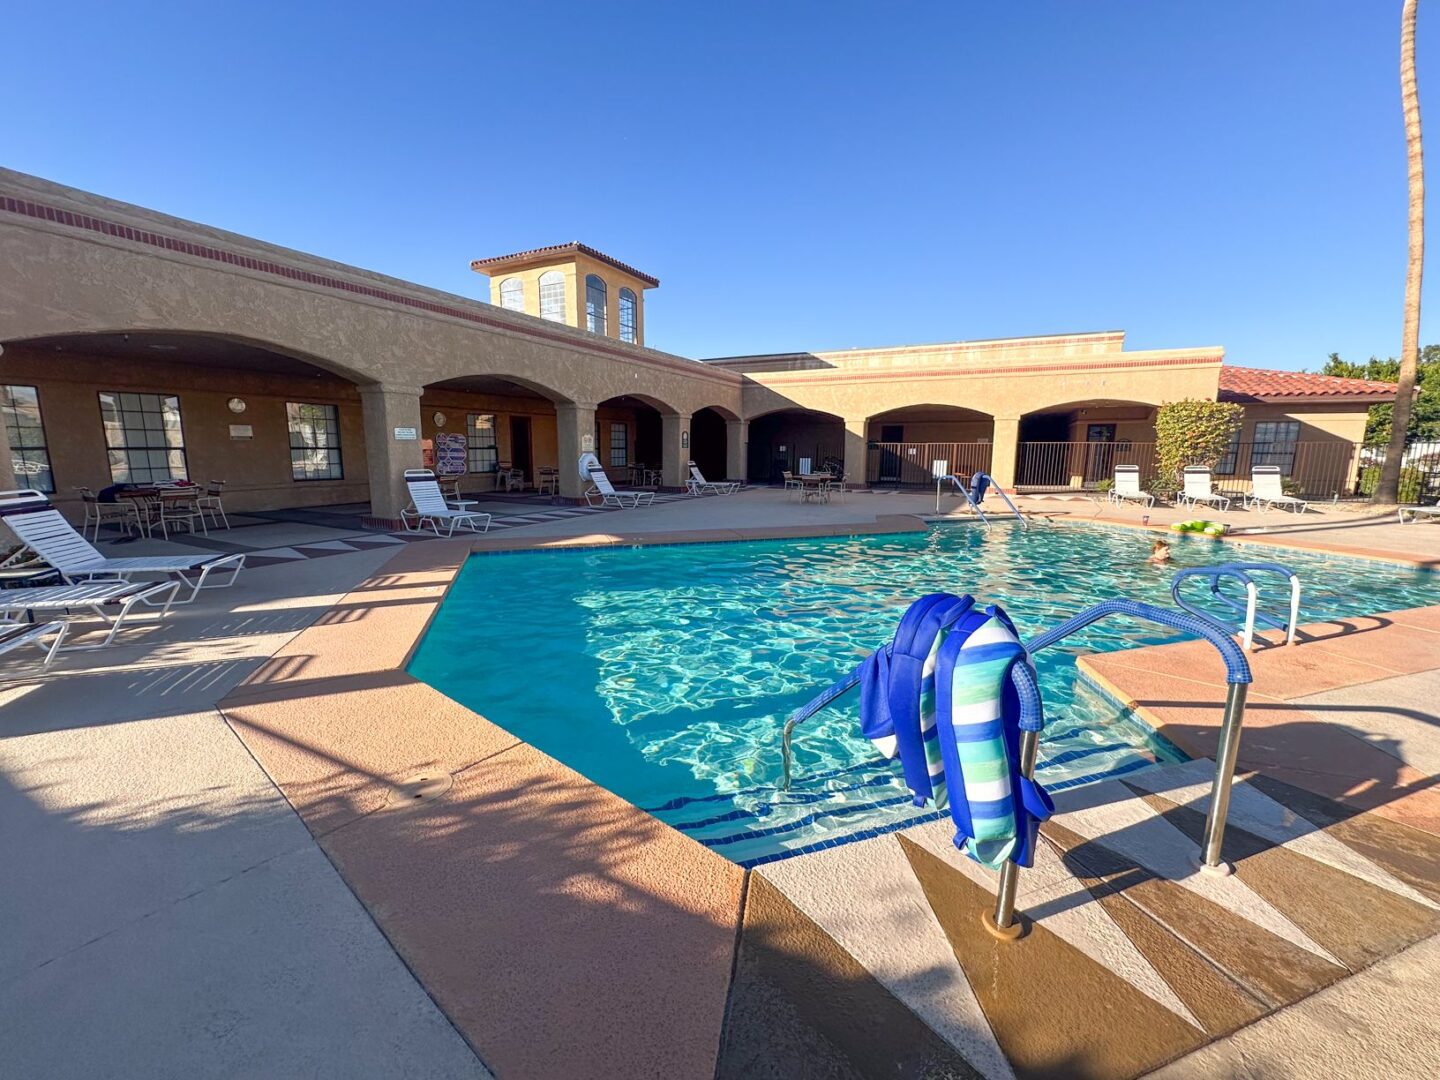 A swimming pool at an apartment complex in arizona.